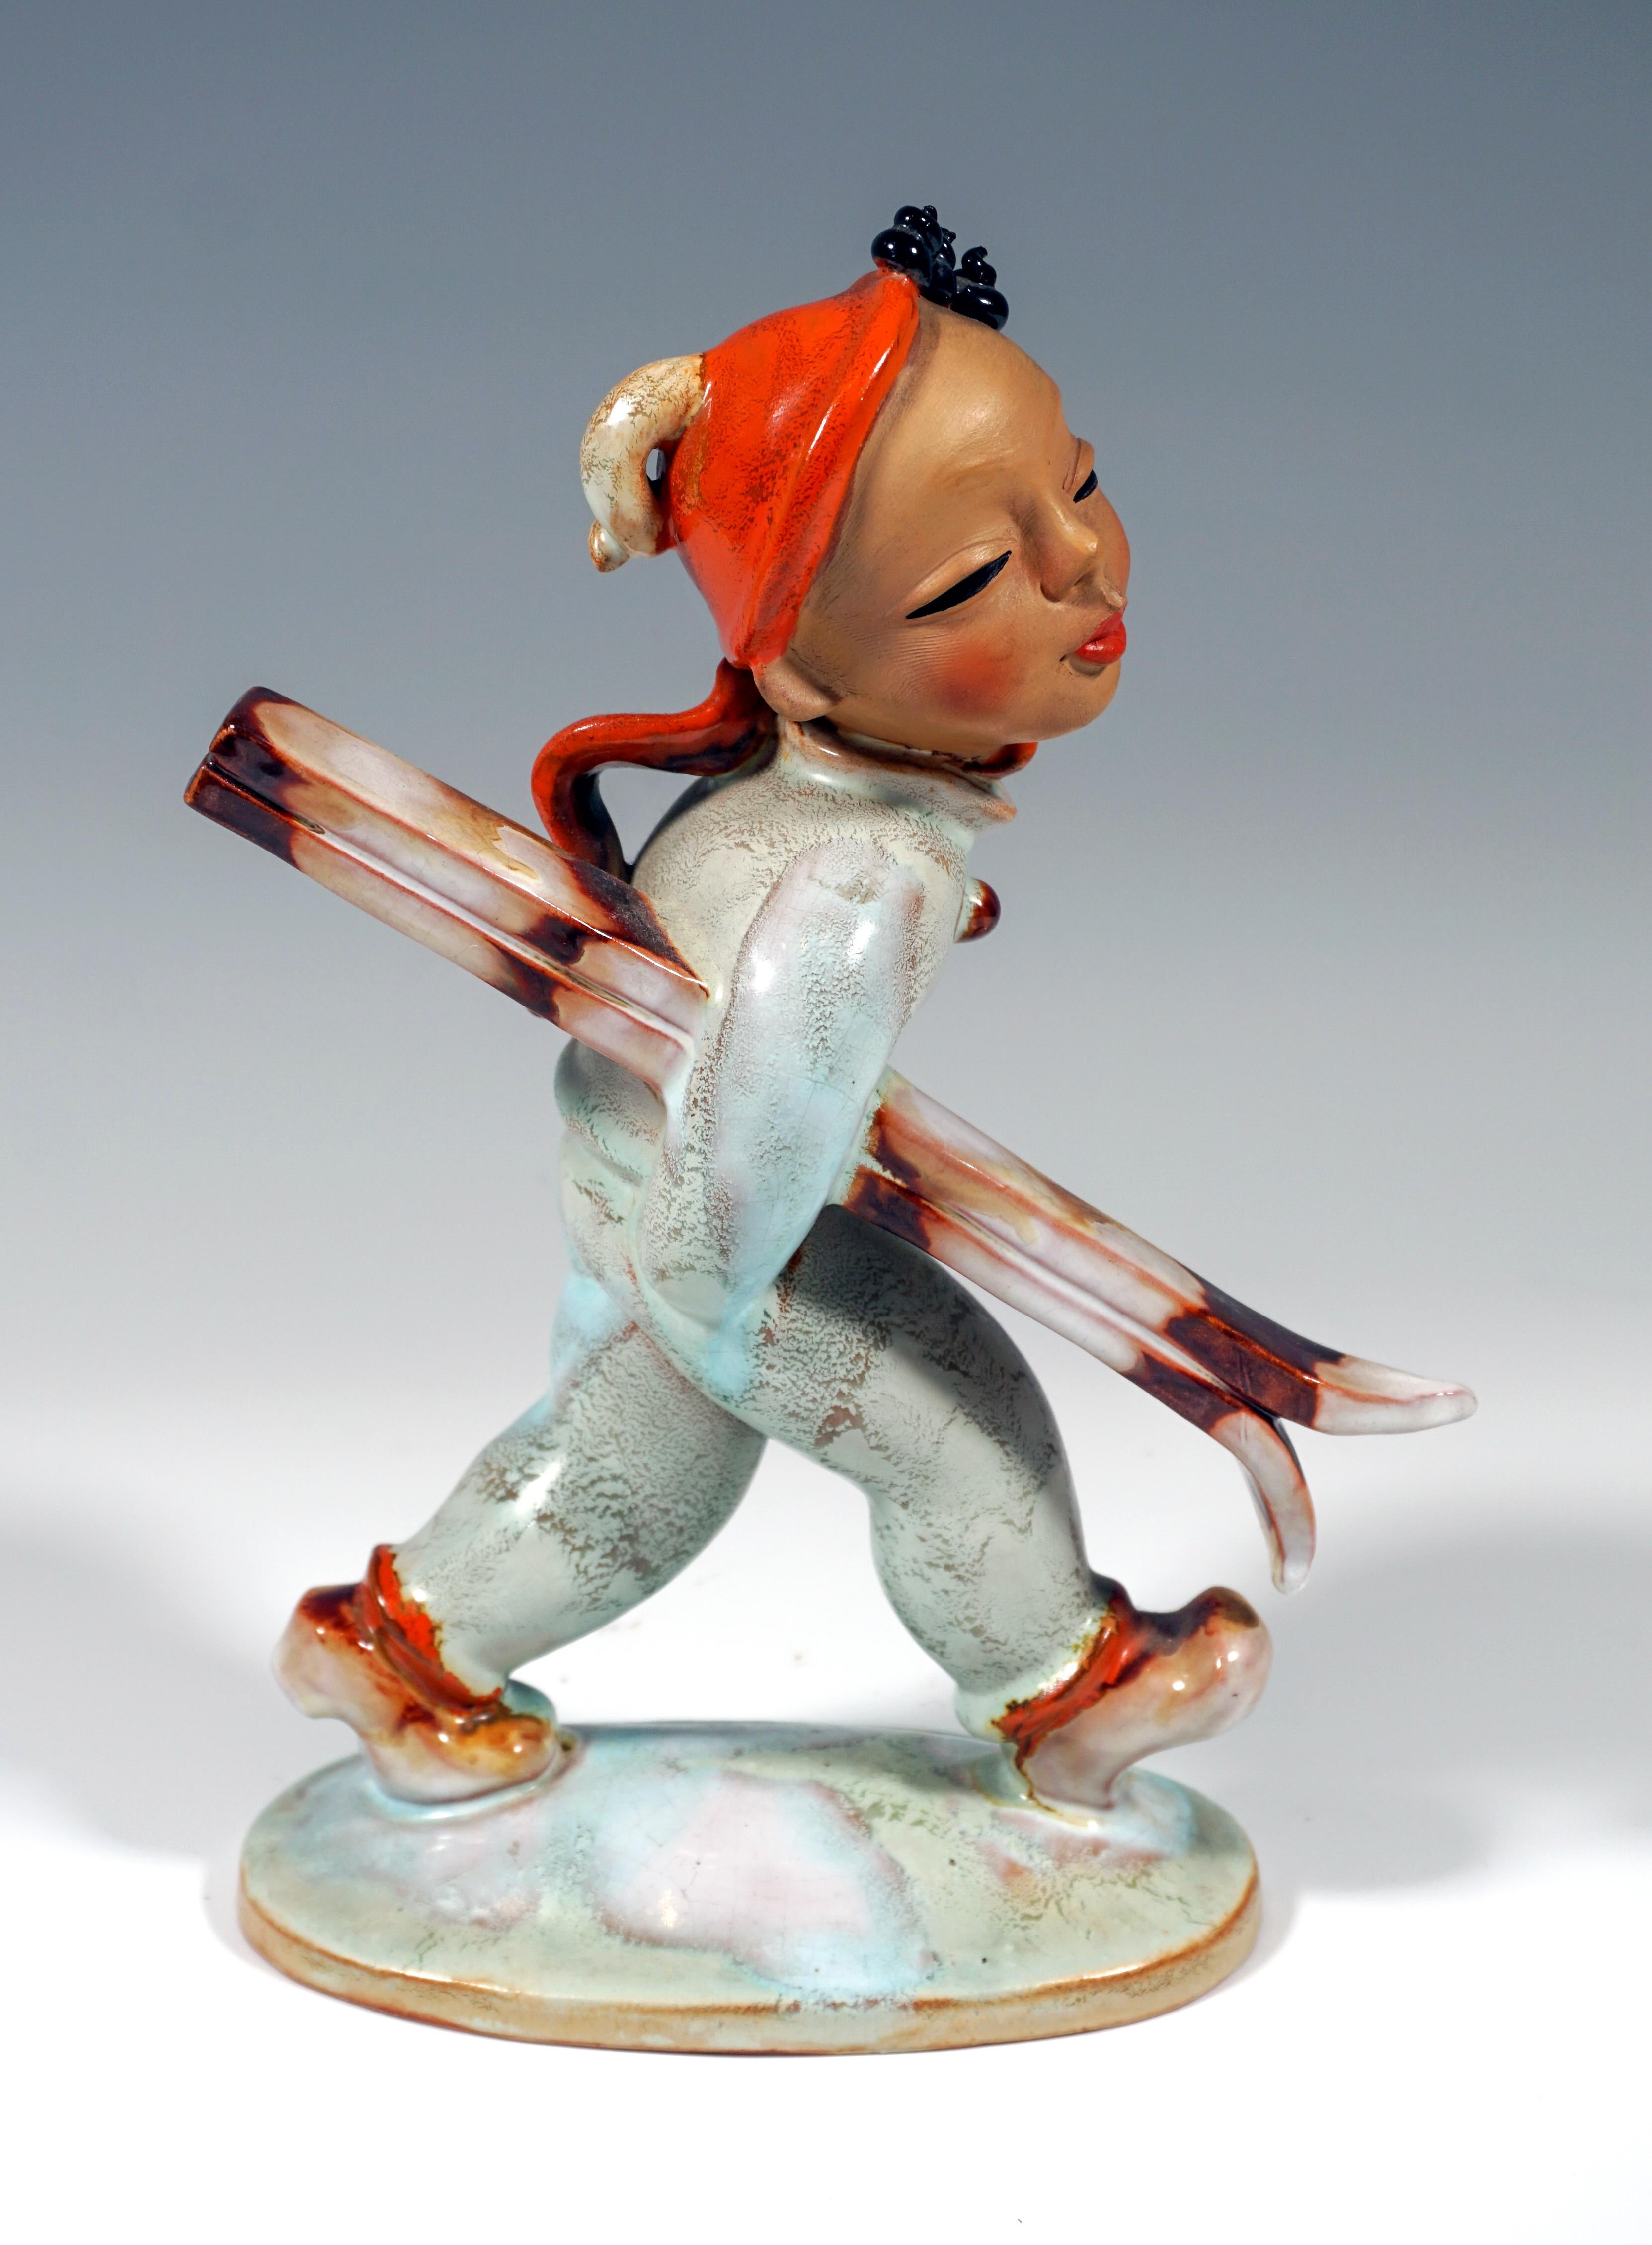 Remarkable Goldscheider Art Déco Figure by Kurt Goebel
The young skier in a light blue overall wears a red CAP, from under which his black curls peek out, and a red scarf. Clutching his skis under his right arm, he walks along.
On an oval snow